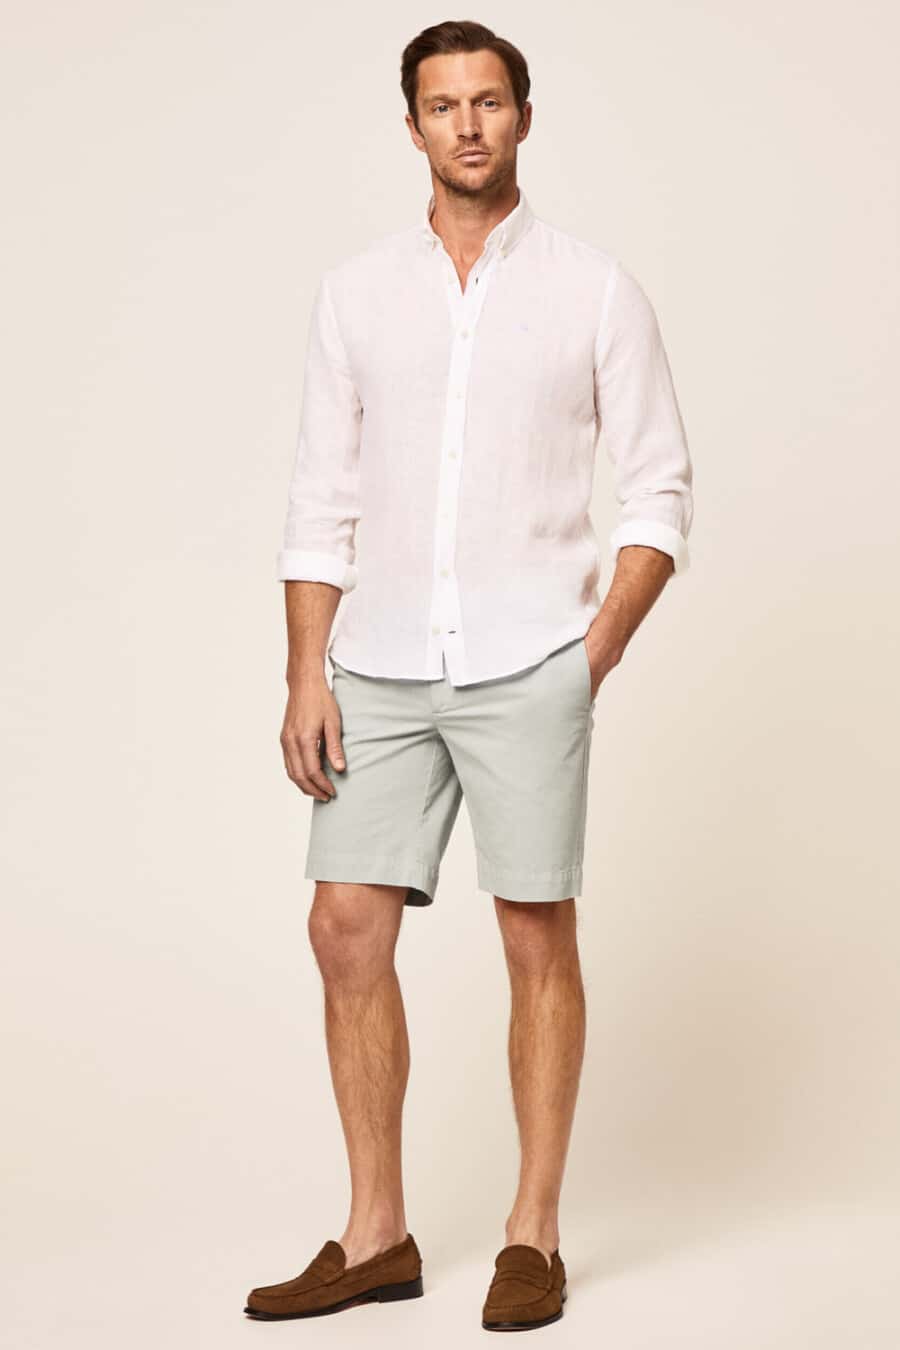 Men's light grey shorts, white linen shirt and brown suede loafers outfit